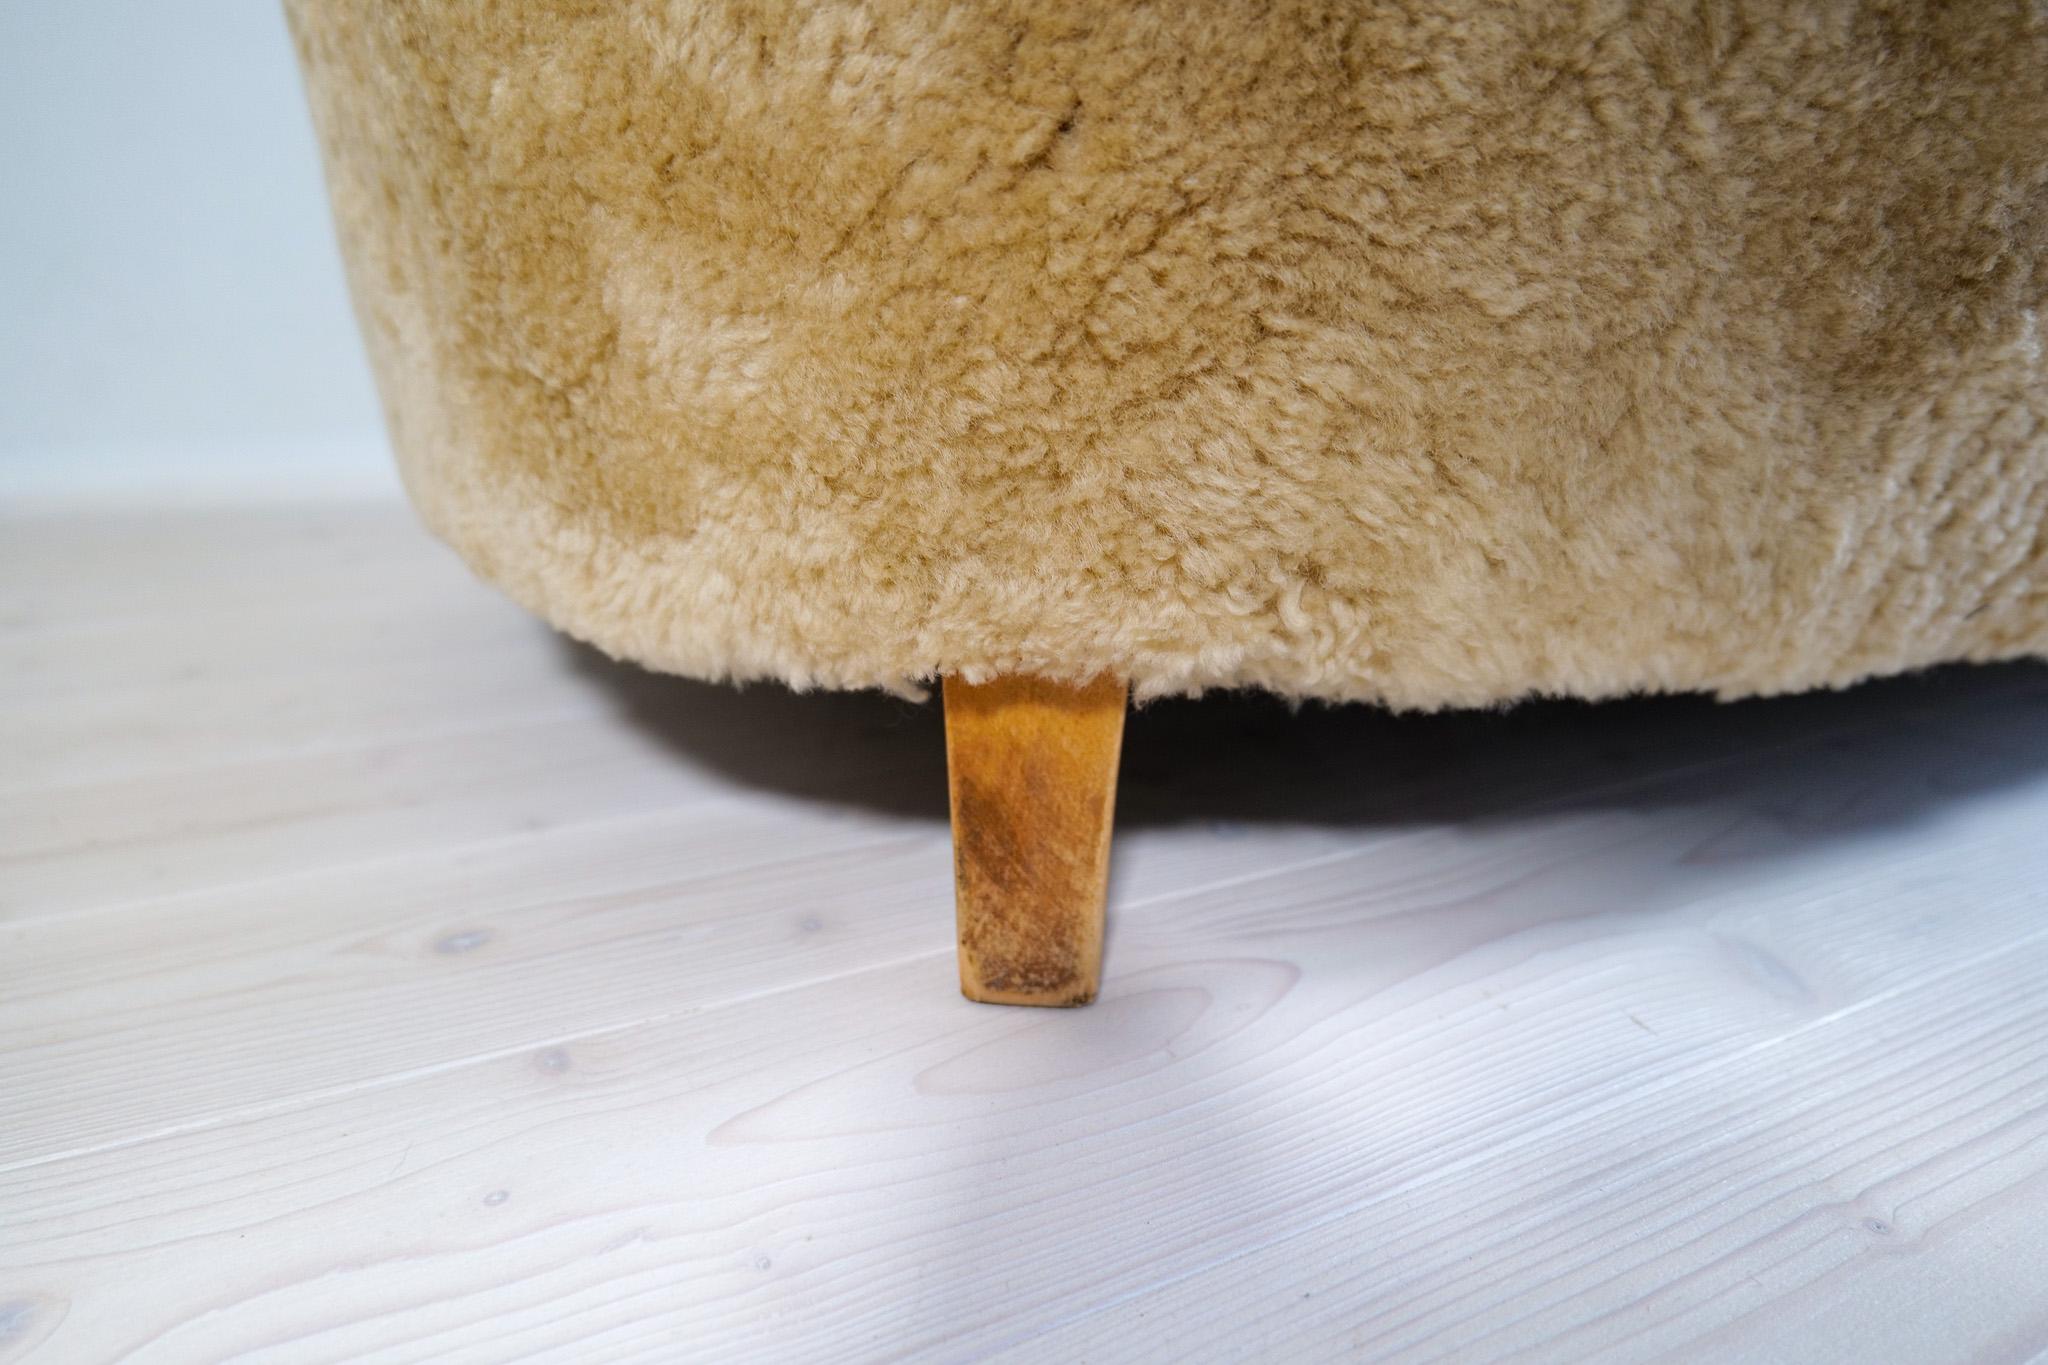 Midcentury Sculptrual Sheepskin/Shearling Sofa in Manors of Marta Blomstedt 12